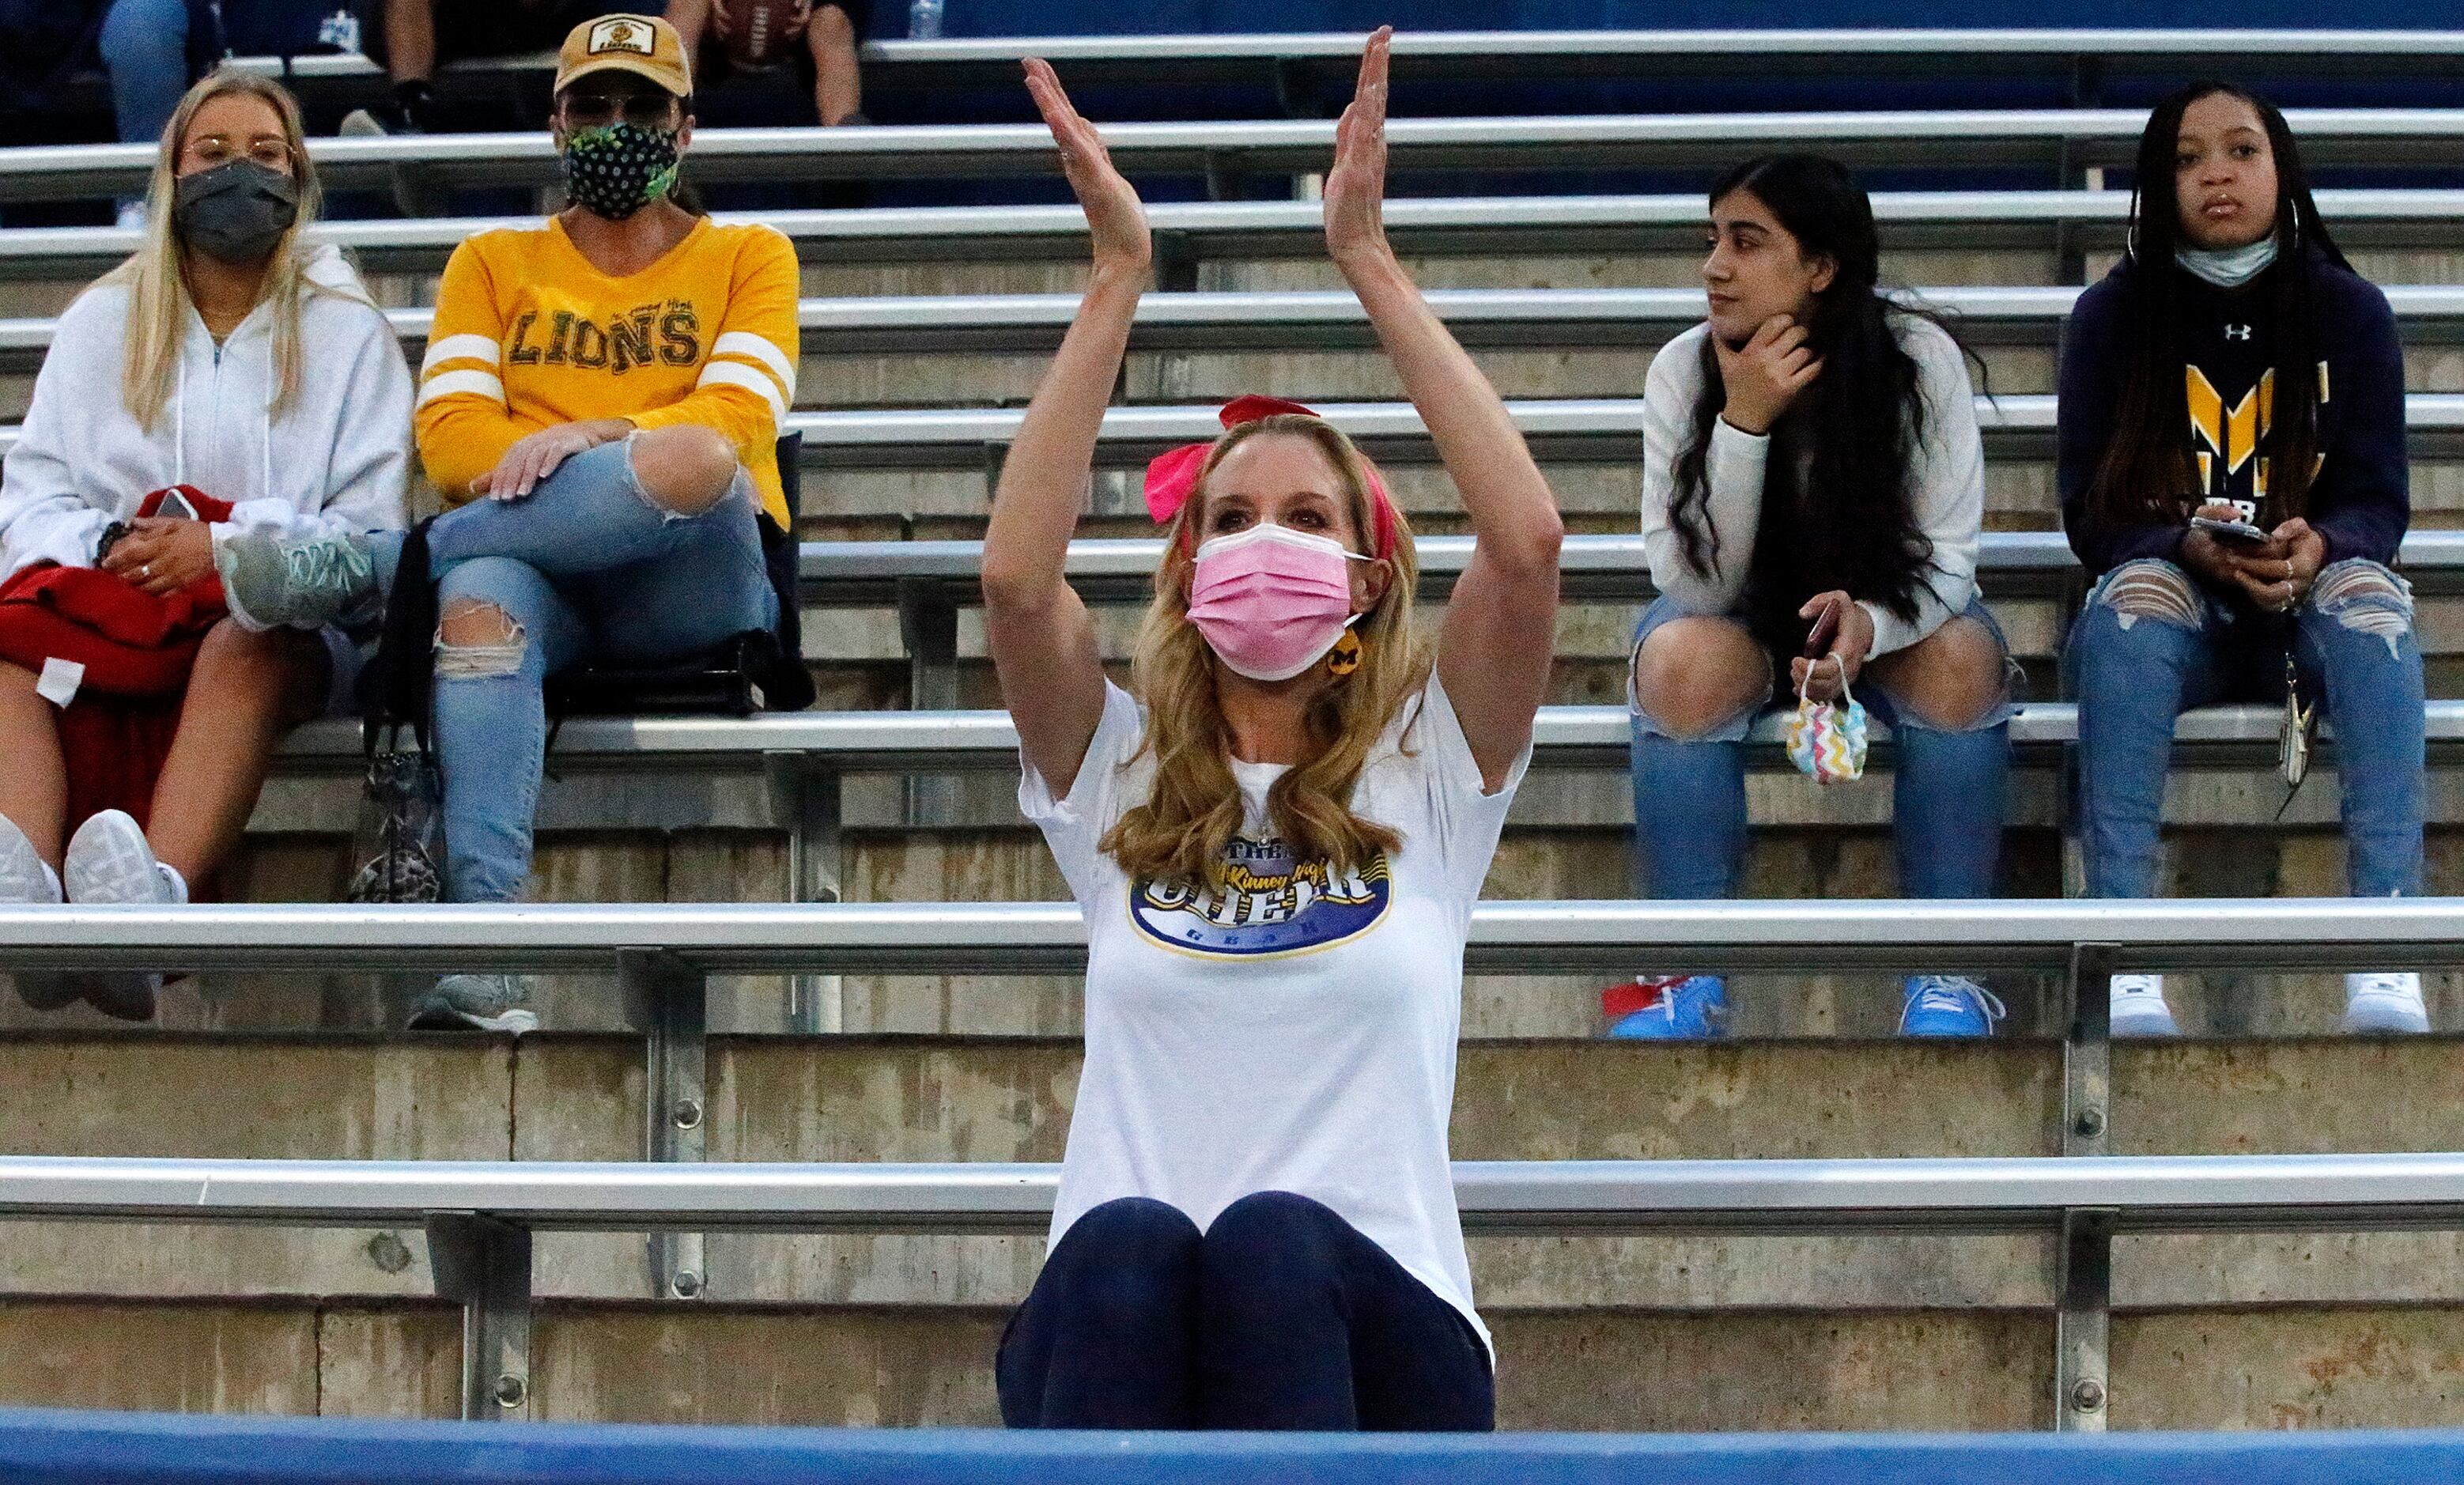 McKinney resident Cindy Philosfsky (center) dons a mask and practices social distancing as...